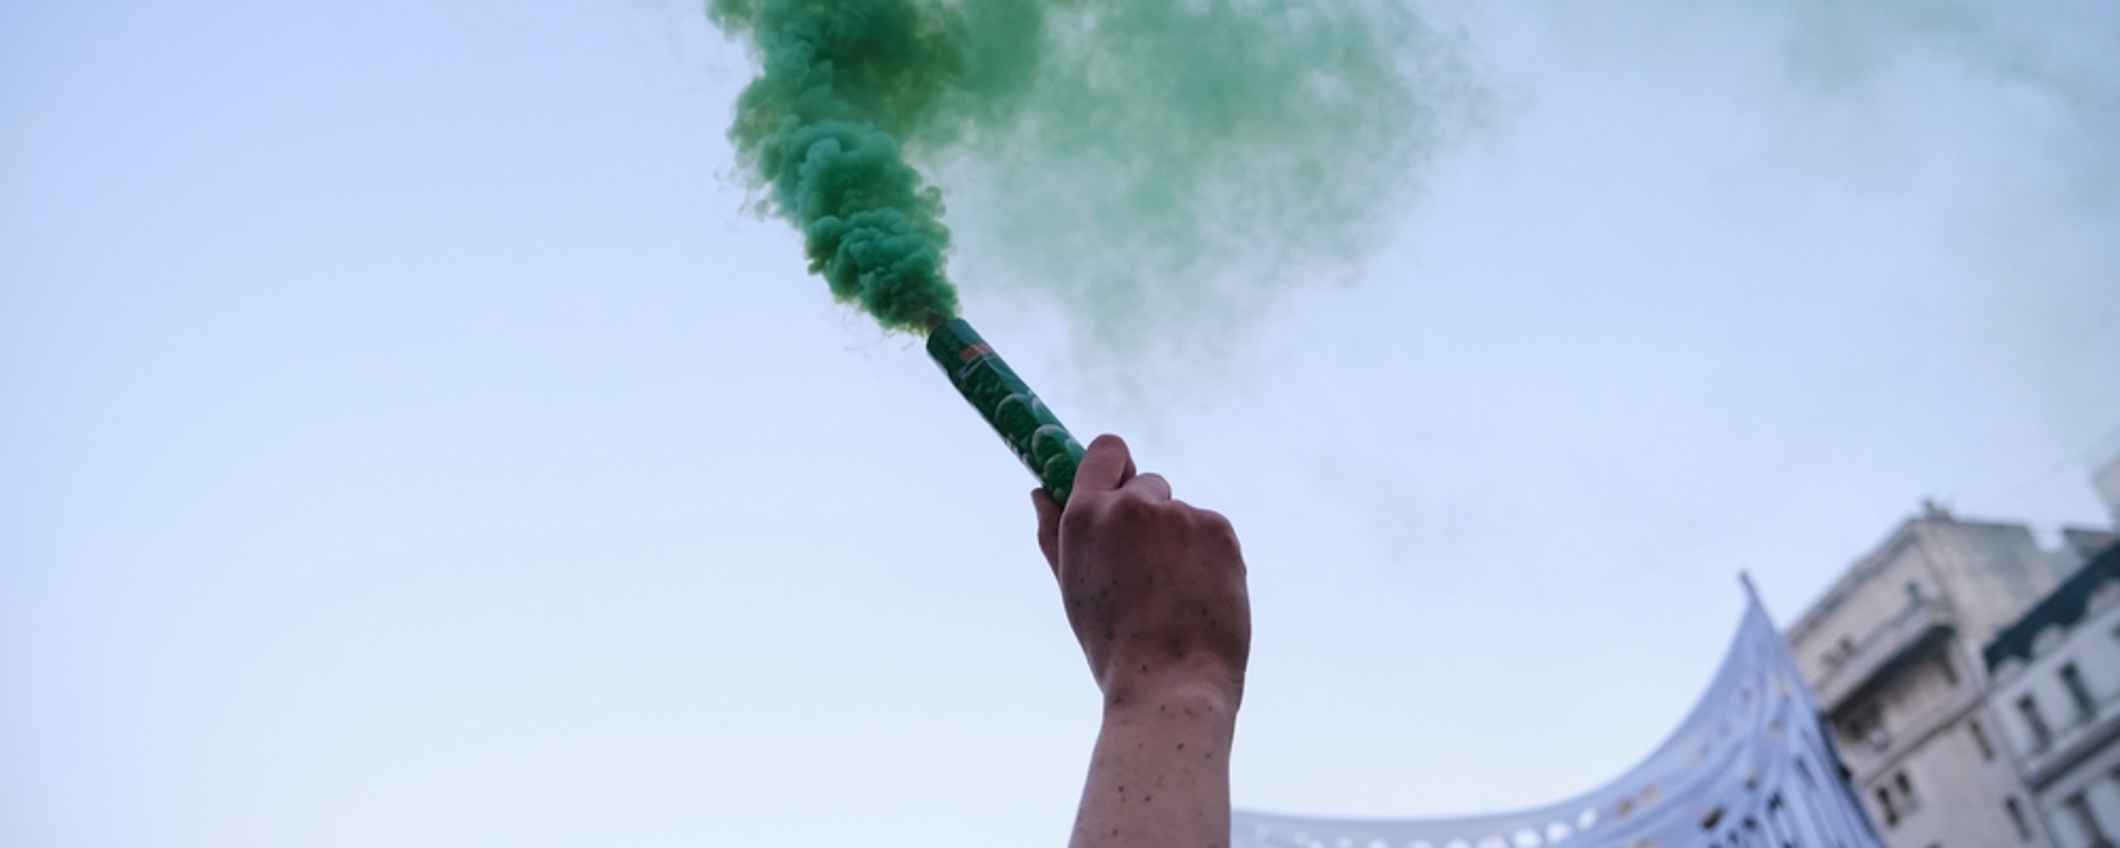 arm raising a green smoke flare at a protest